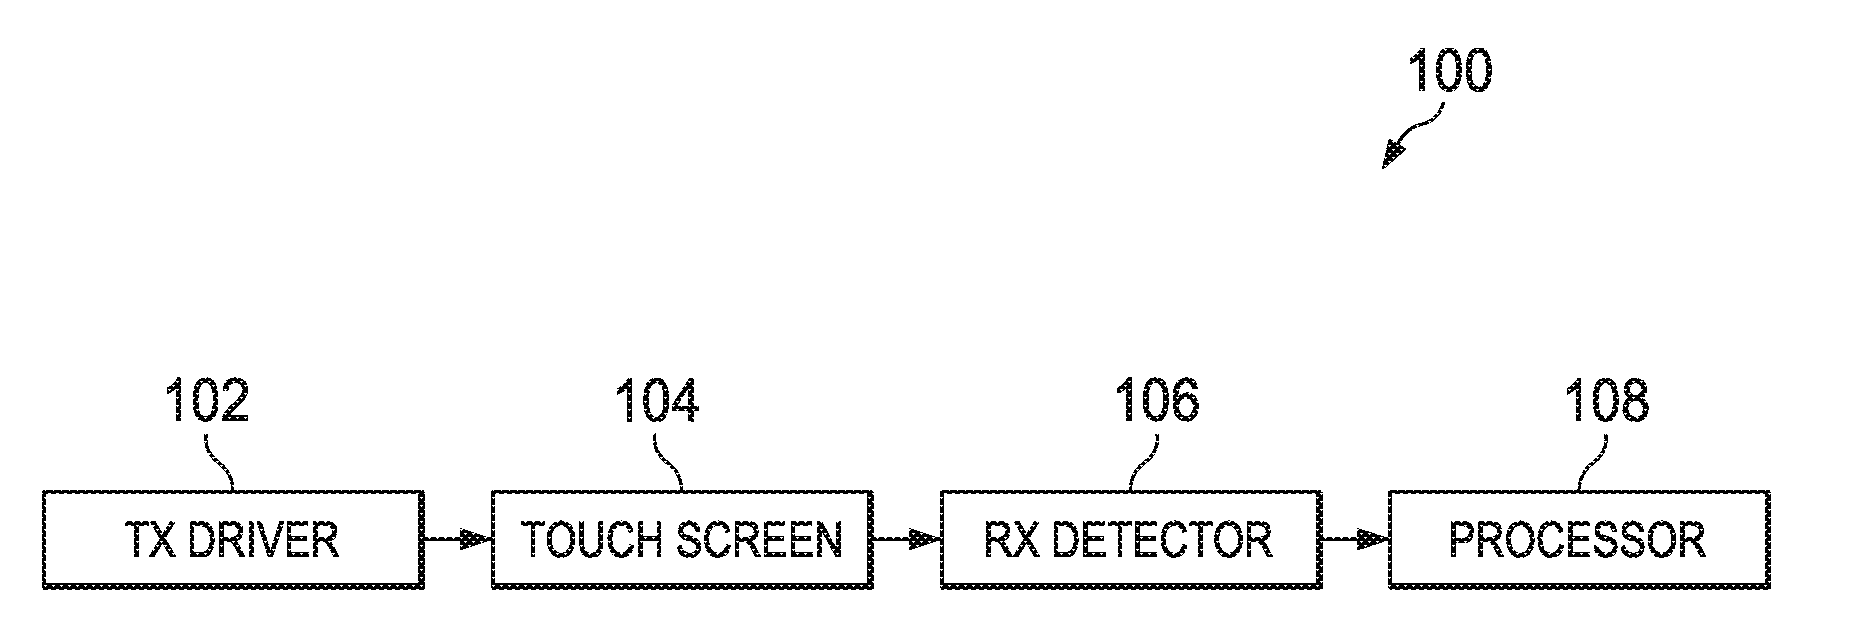 Apparatus and Method for Preventing False Touches in Touch Screen Systems